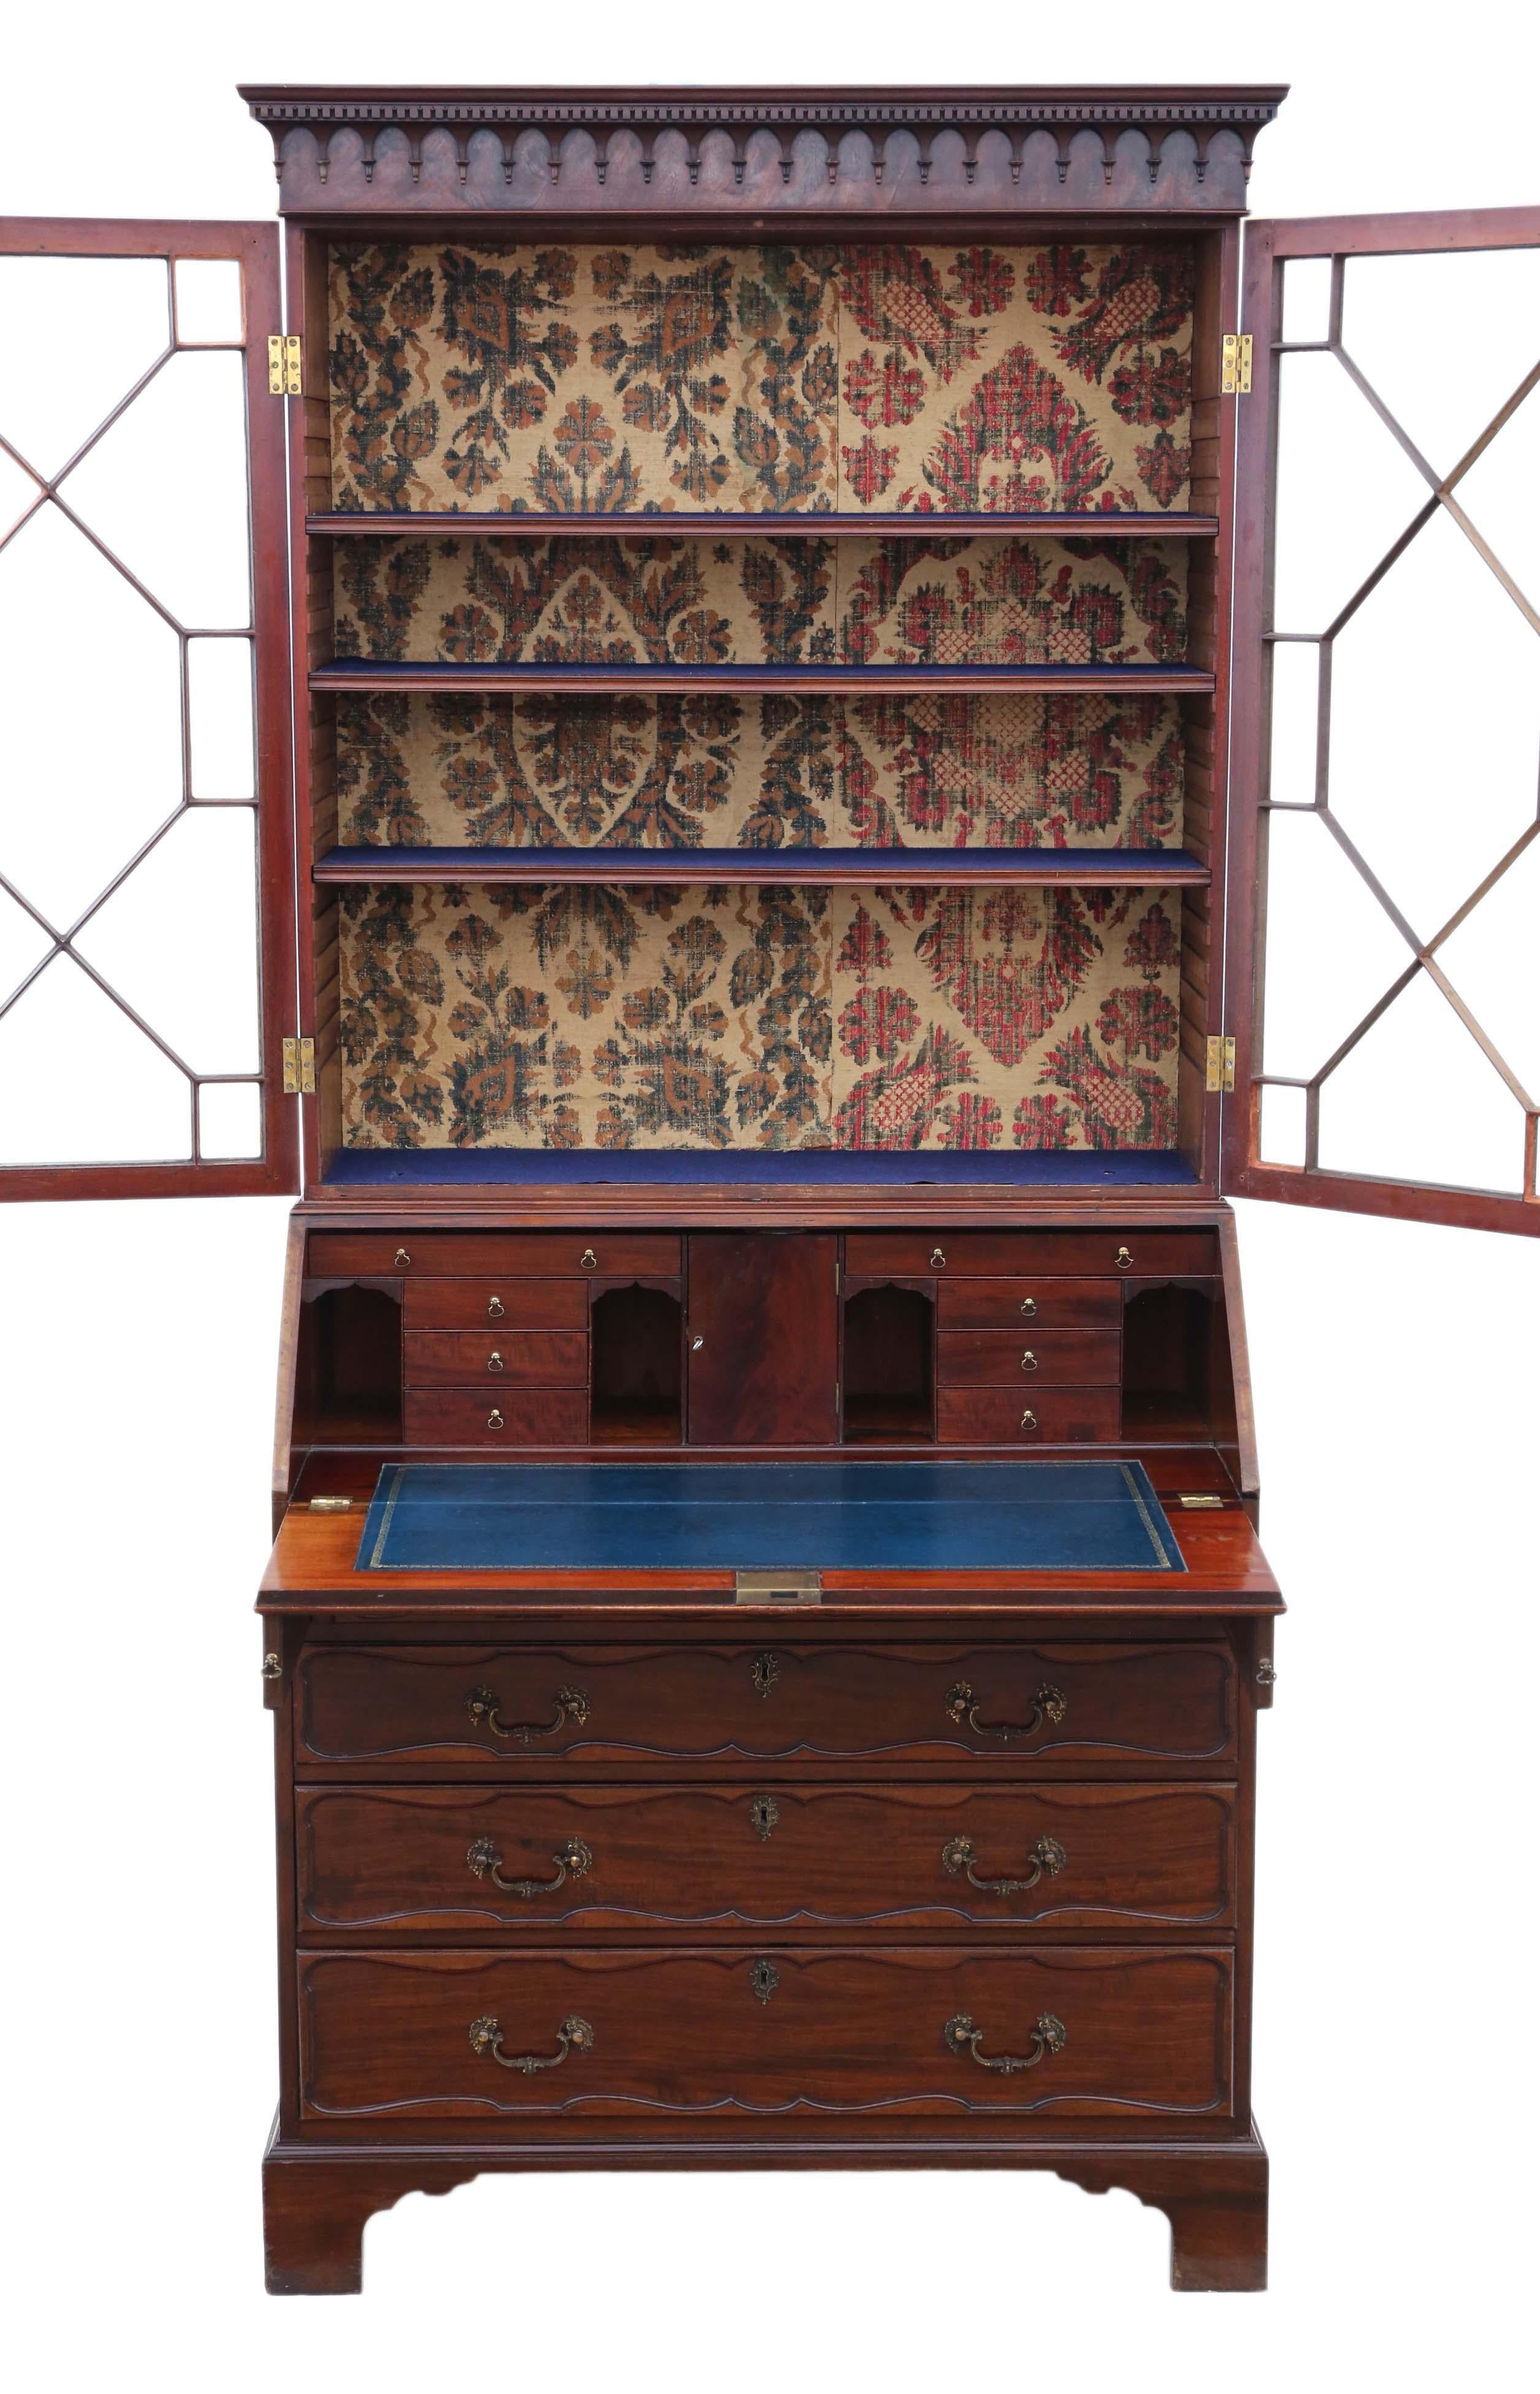 Antique fine quality William IV mahogany glazed bureau bookcase, circa 1835, 19th century.

We have a key for the bookcase and a small internal door only. Adjustable shelves.

Beautiful astral glazed doors with lovely period glass. Later tooled